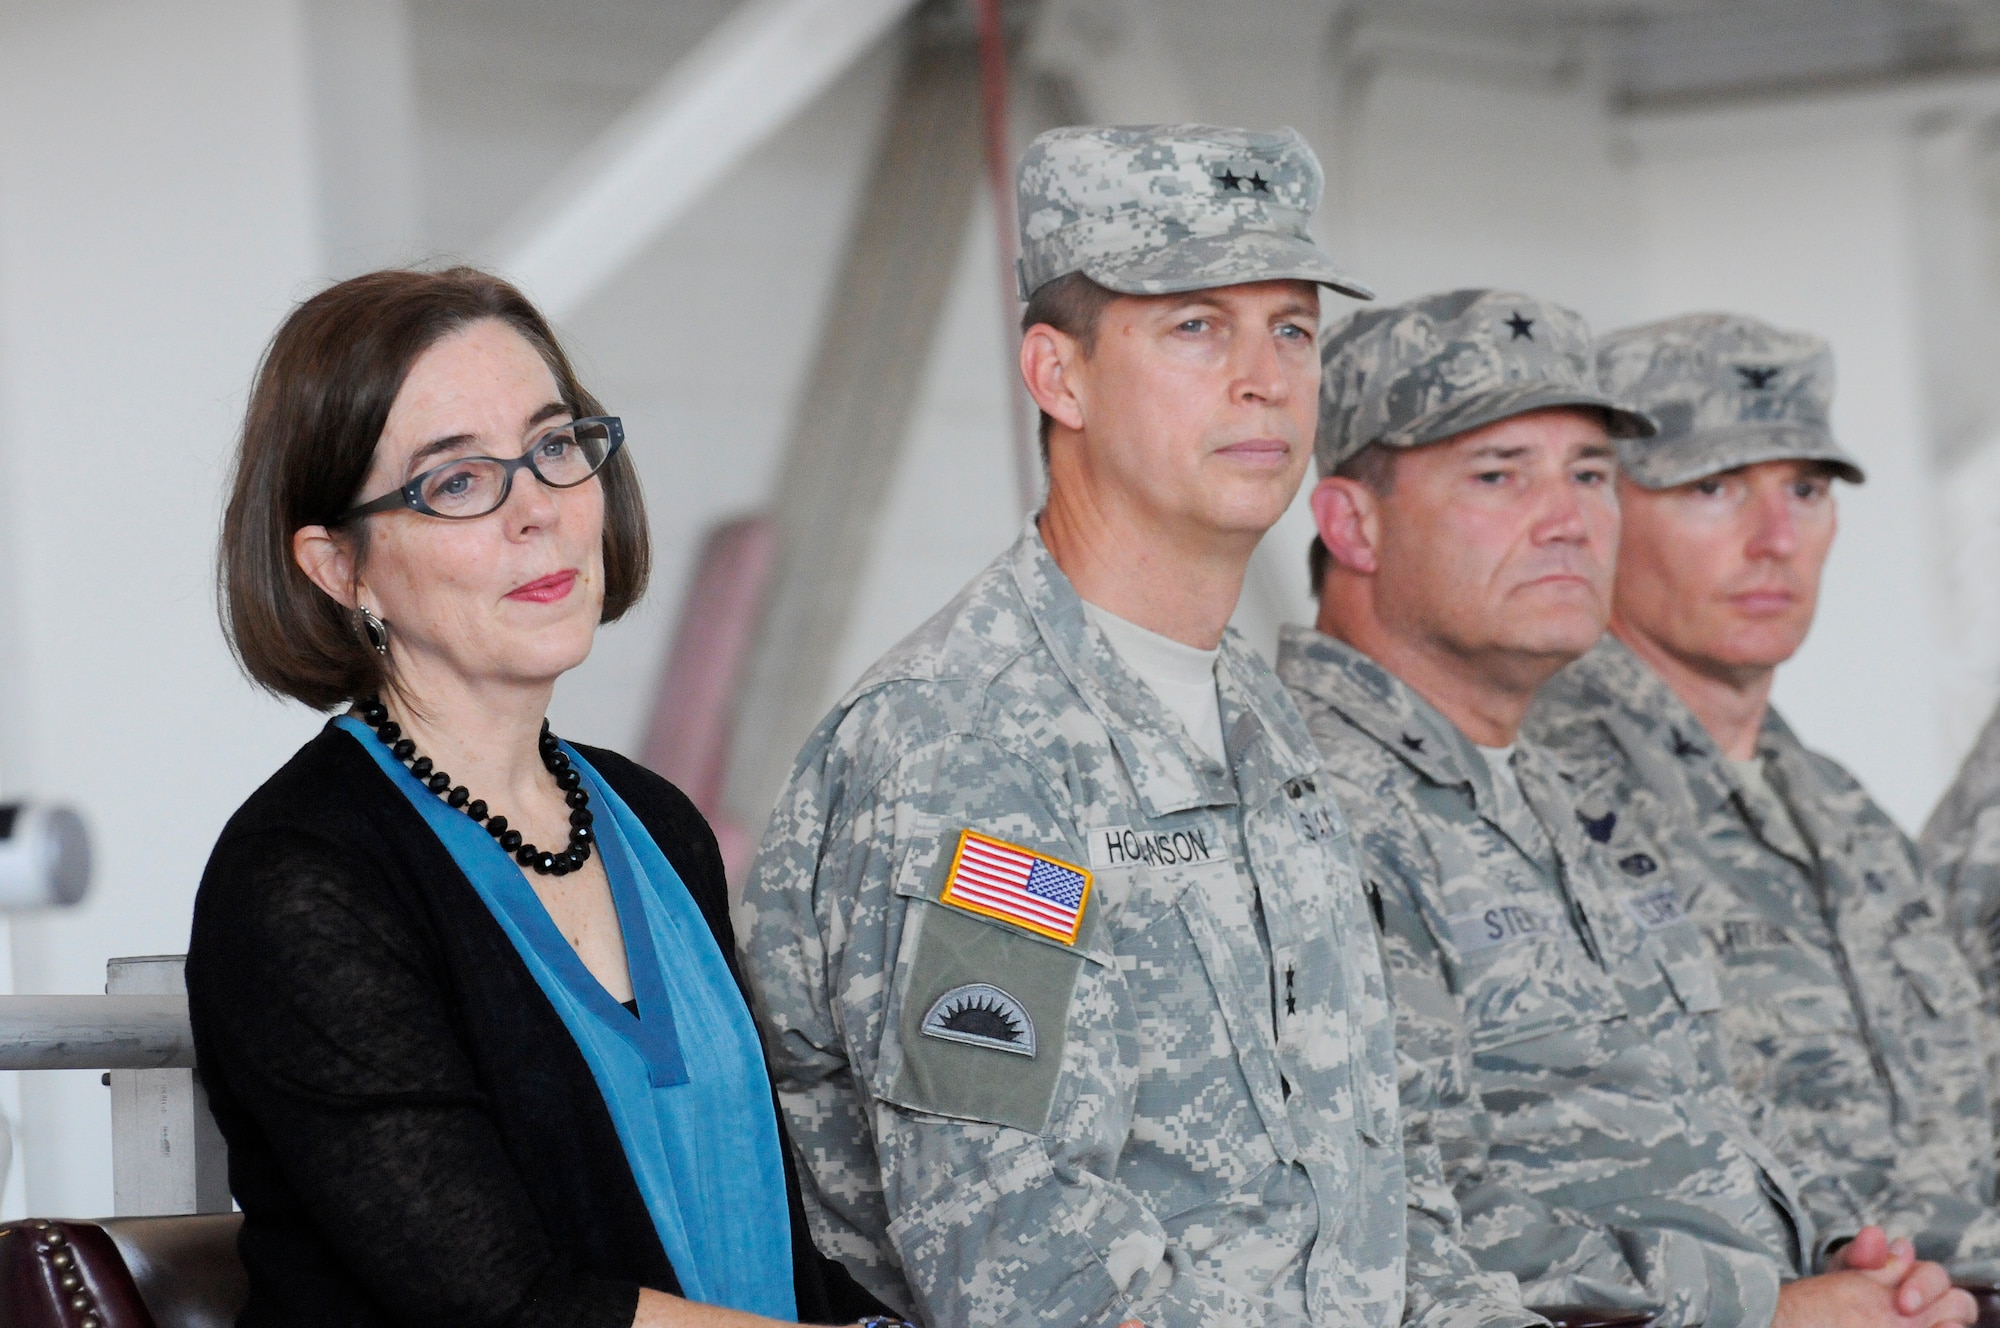 Members of the official party, left to right, Oregon Governor Kate Brown, Oregon Adjutant General Daniel Hokanson, Oregon Air National Guard Commander Michael Stencel and 142nd Fighter Wing Commander Col. Paul Fitzgerald listen to music performed by the 234th Army National Guard Band during the 142nd Fighter Wing mobilization ceremony, June 26, 2015, Portland Air National Guard Base, Ore. (U.S. Air National Guard photo by Tech. Sgt. John Hughel, 142nd Fighter Wing Public Affairs/Released)